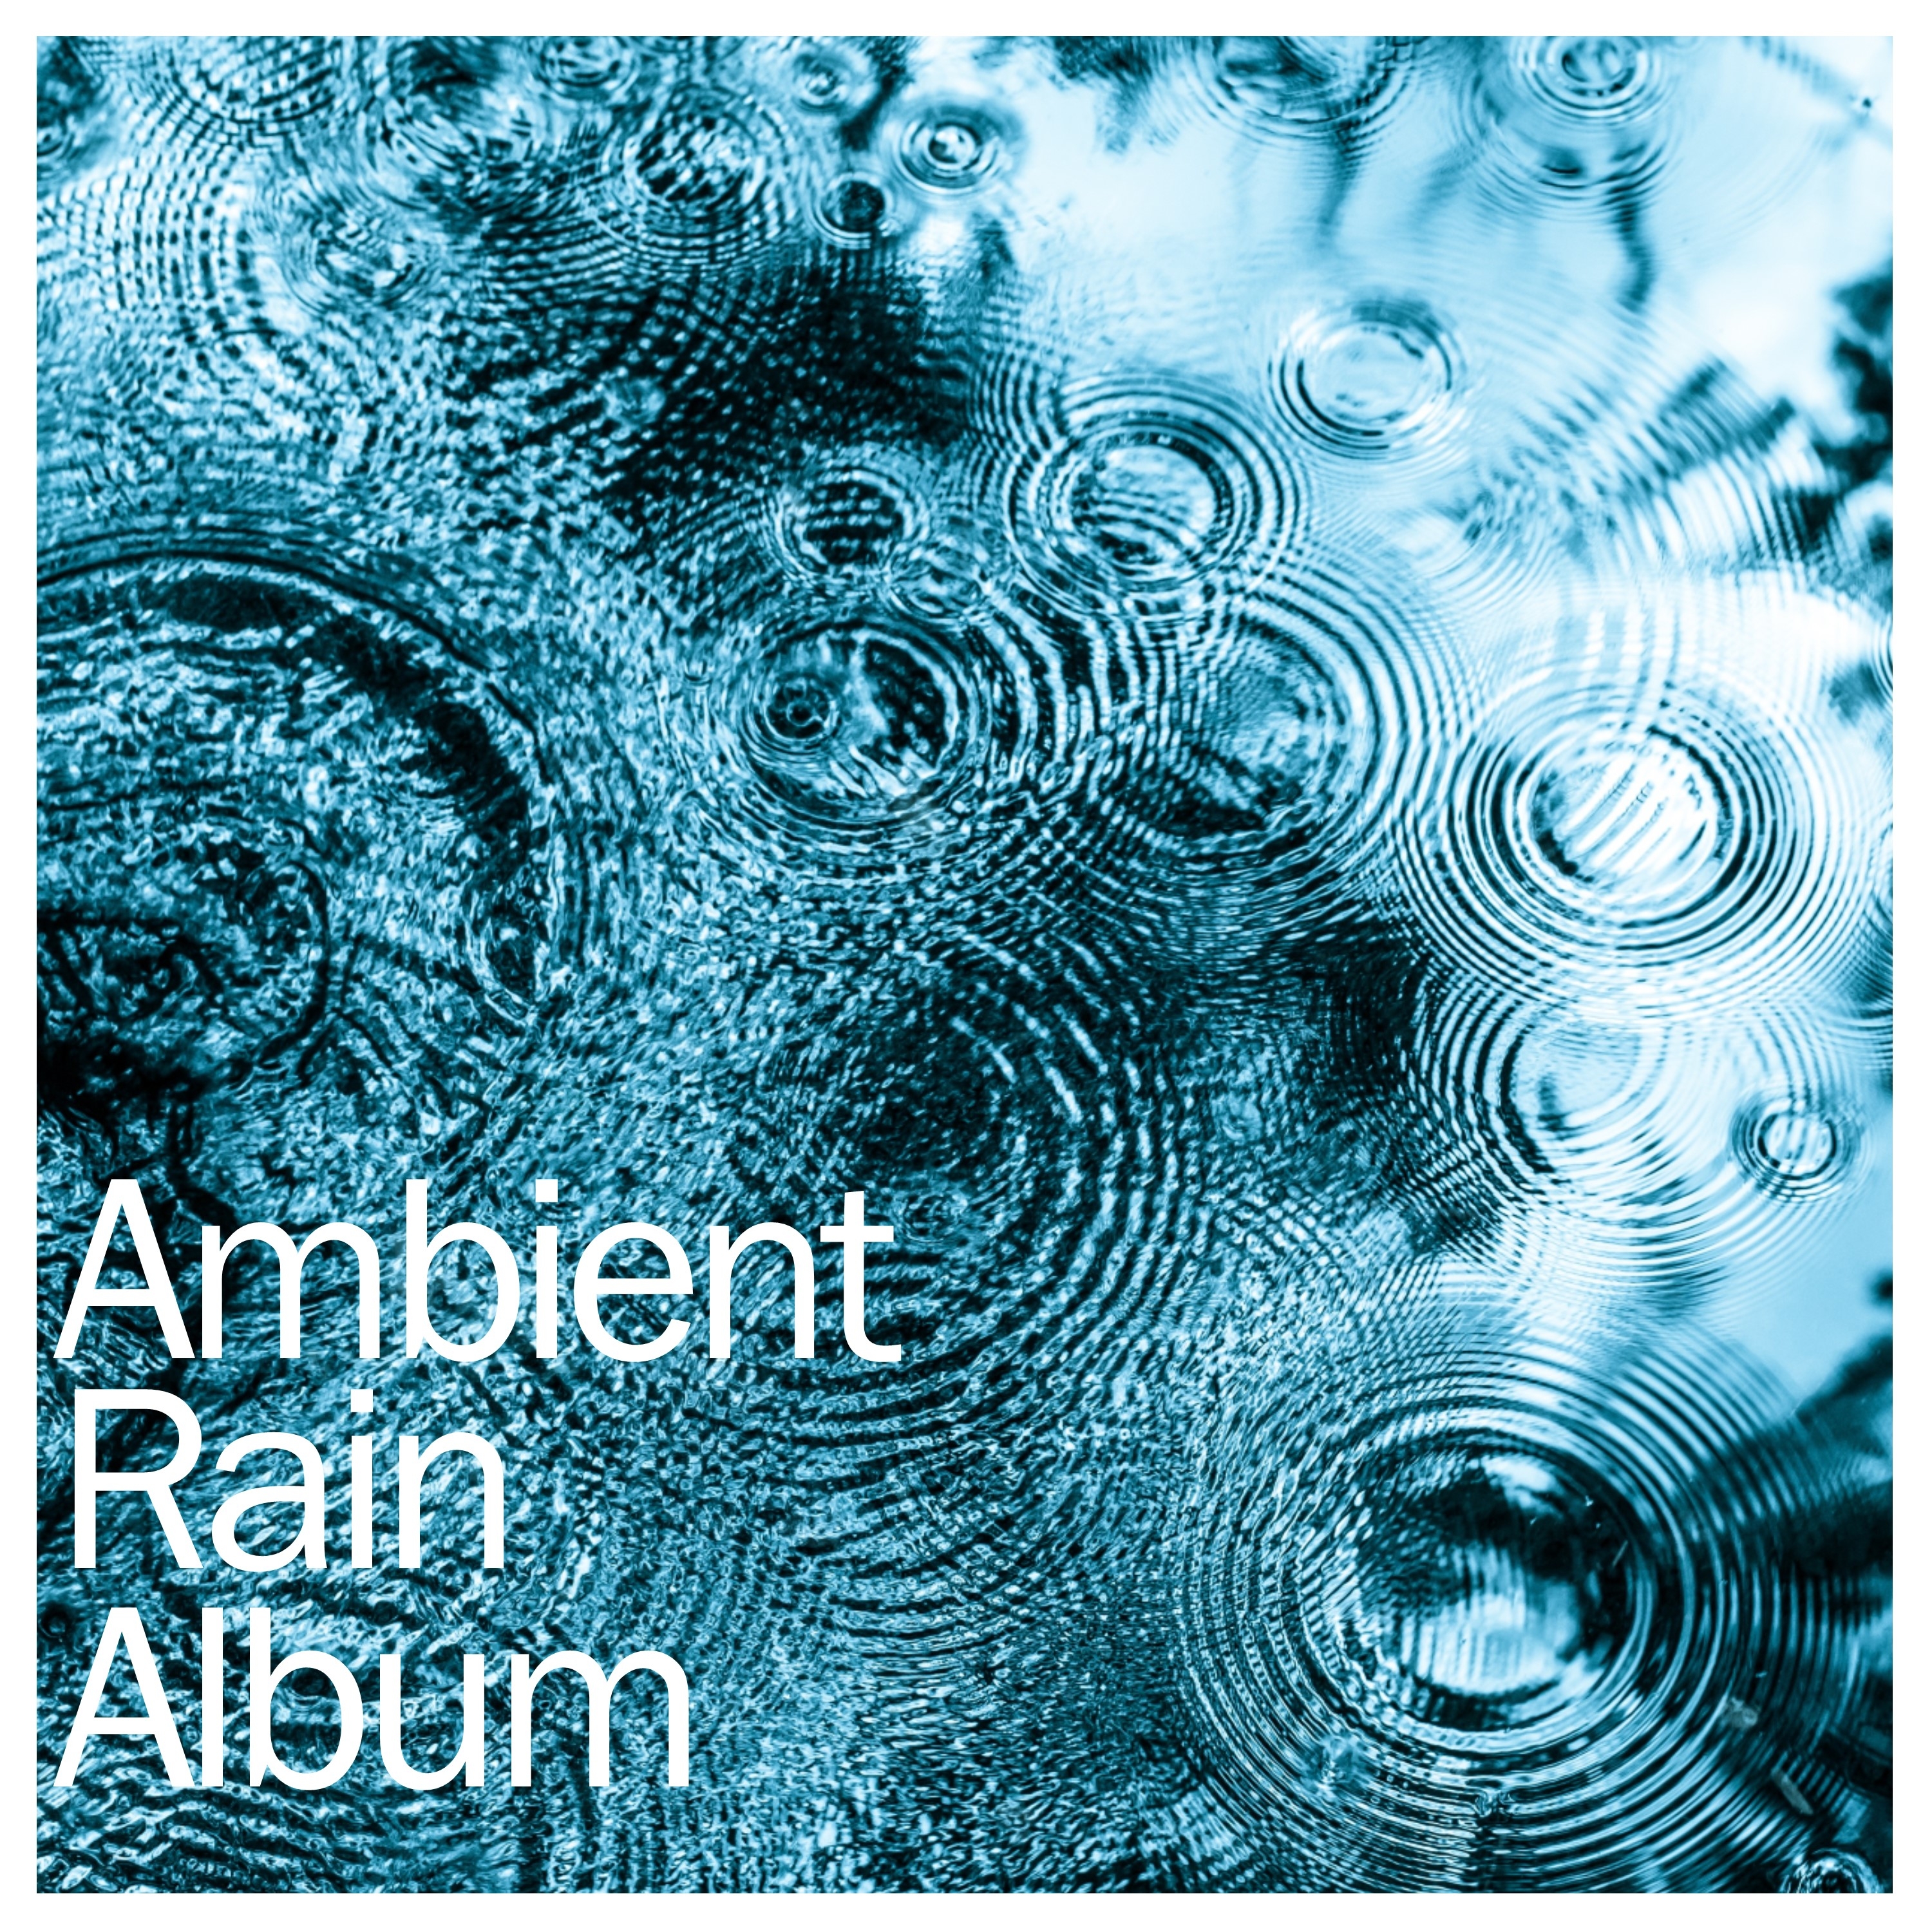 20 Ambient Rain Sounds - Achieve Inner Peace for Meditation and Sleep